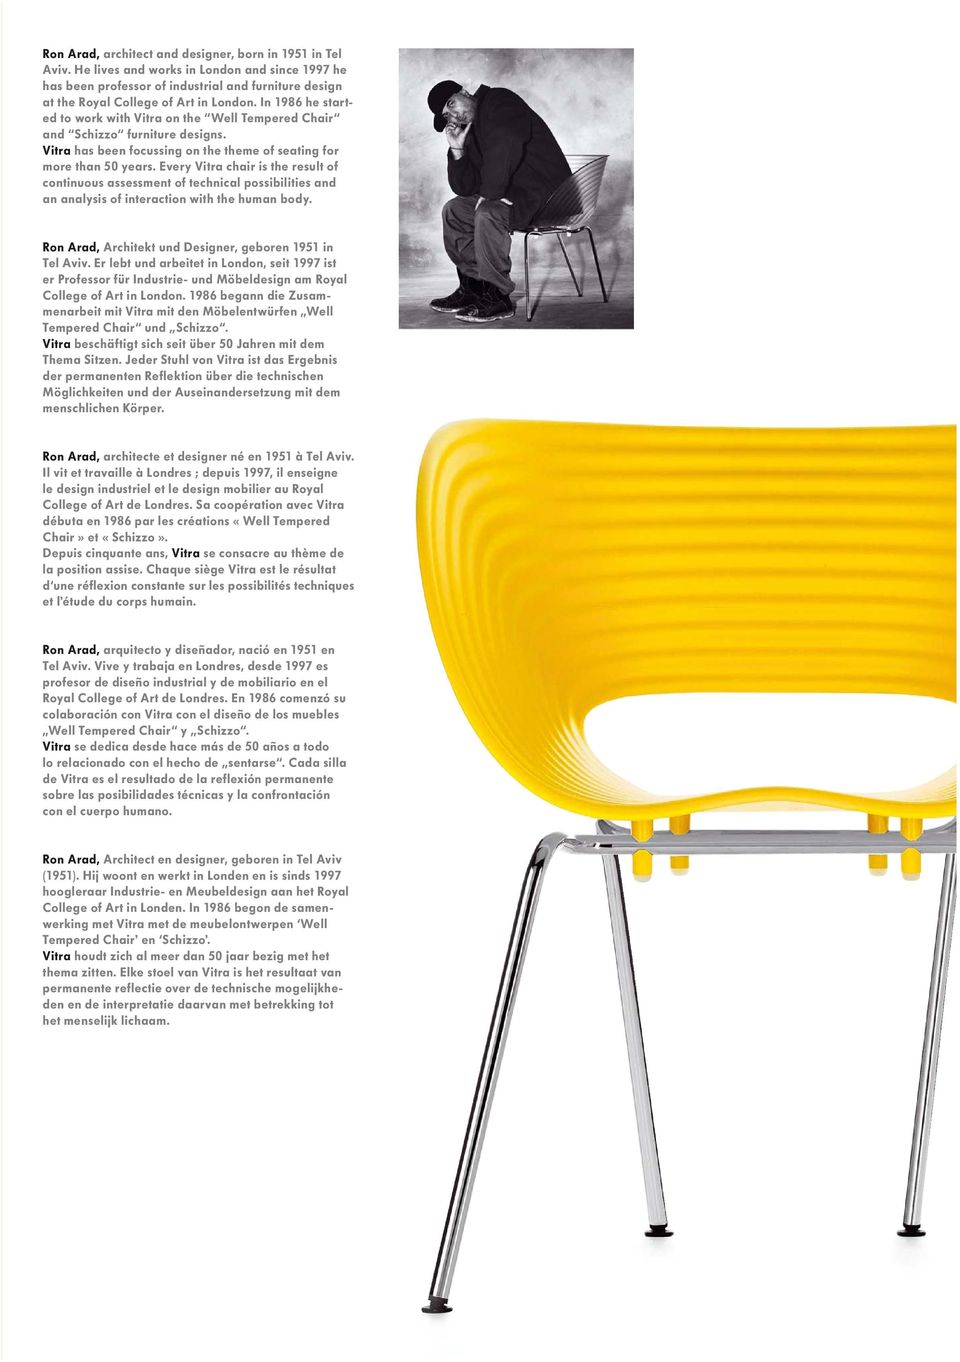 Every Vitra chair is the result of continuous assessment of technical possibilities and an analysis of interaction with the human body. Ron Arad, Architekt und Designer, geboren 1951 in Tel Aviv.